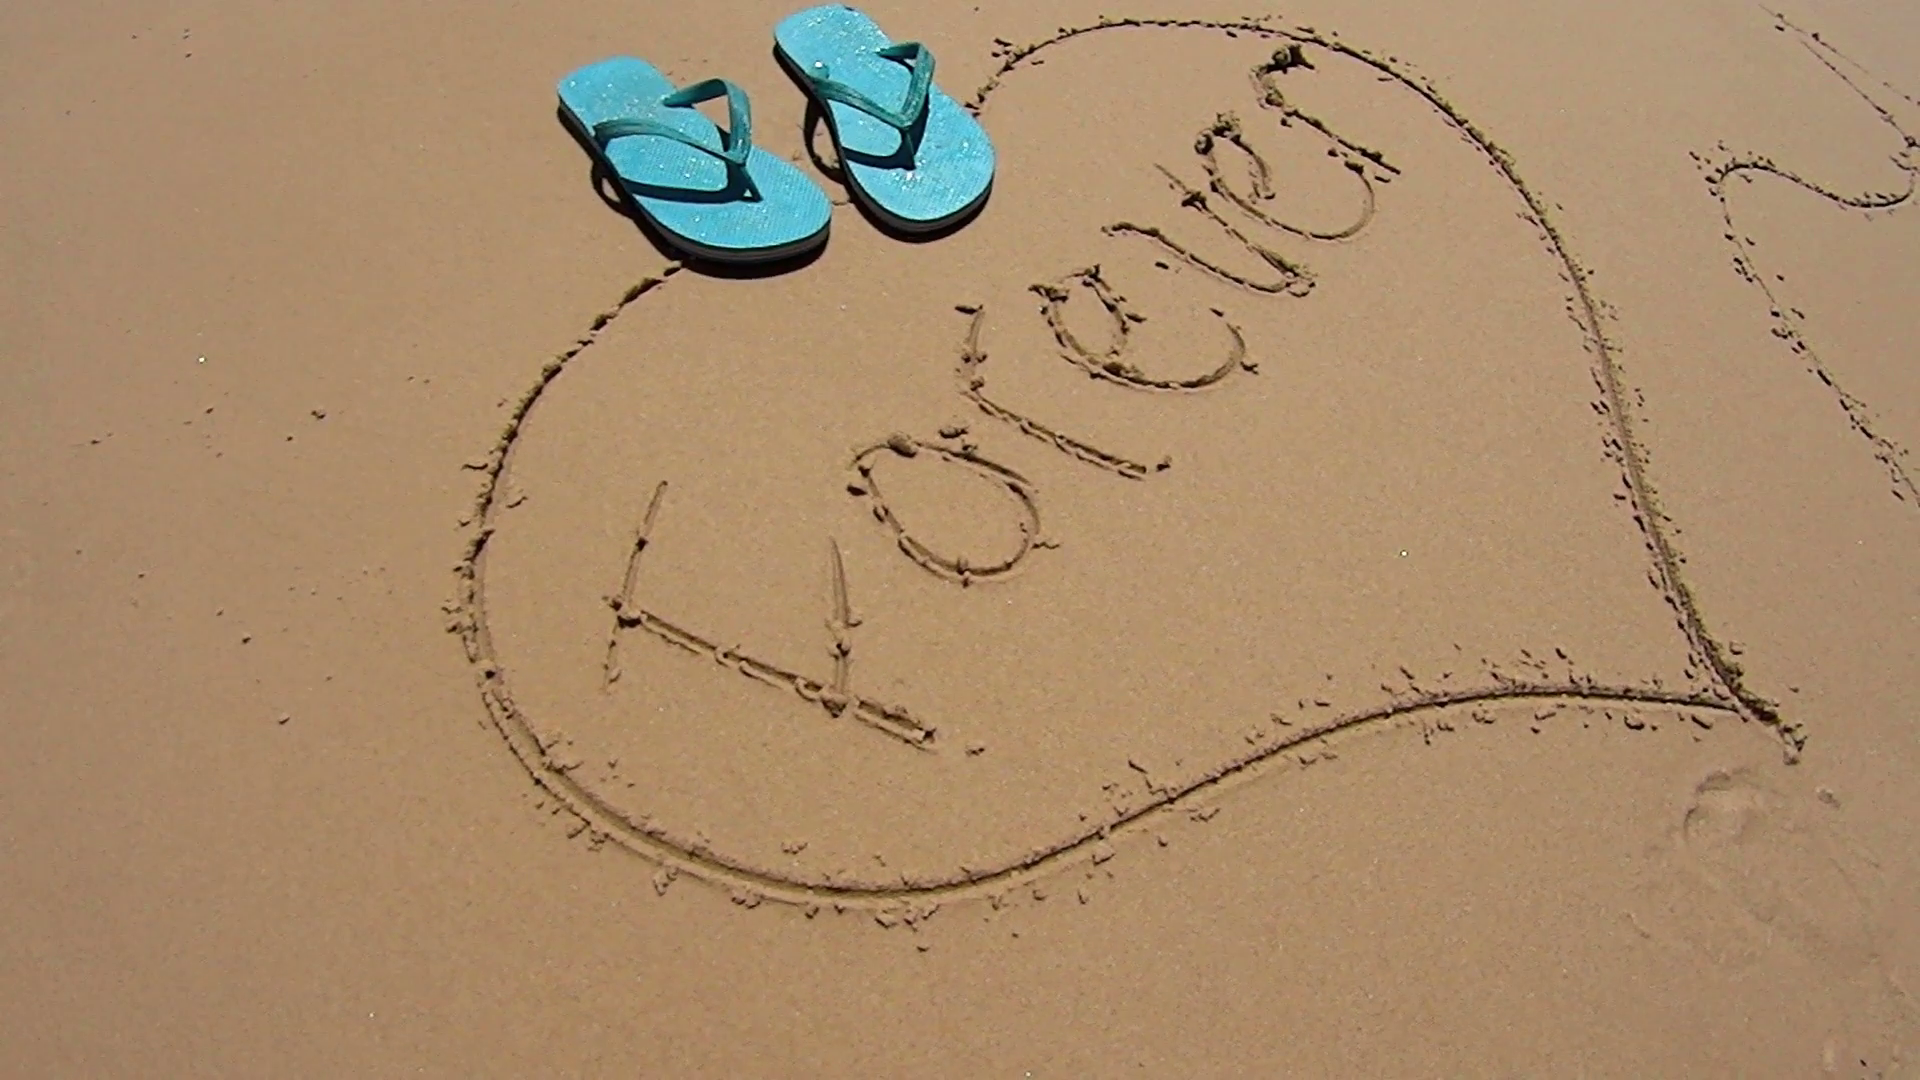 Pair of flip flops dropped on a love heart drawn in the sand on a ...